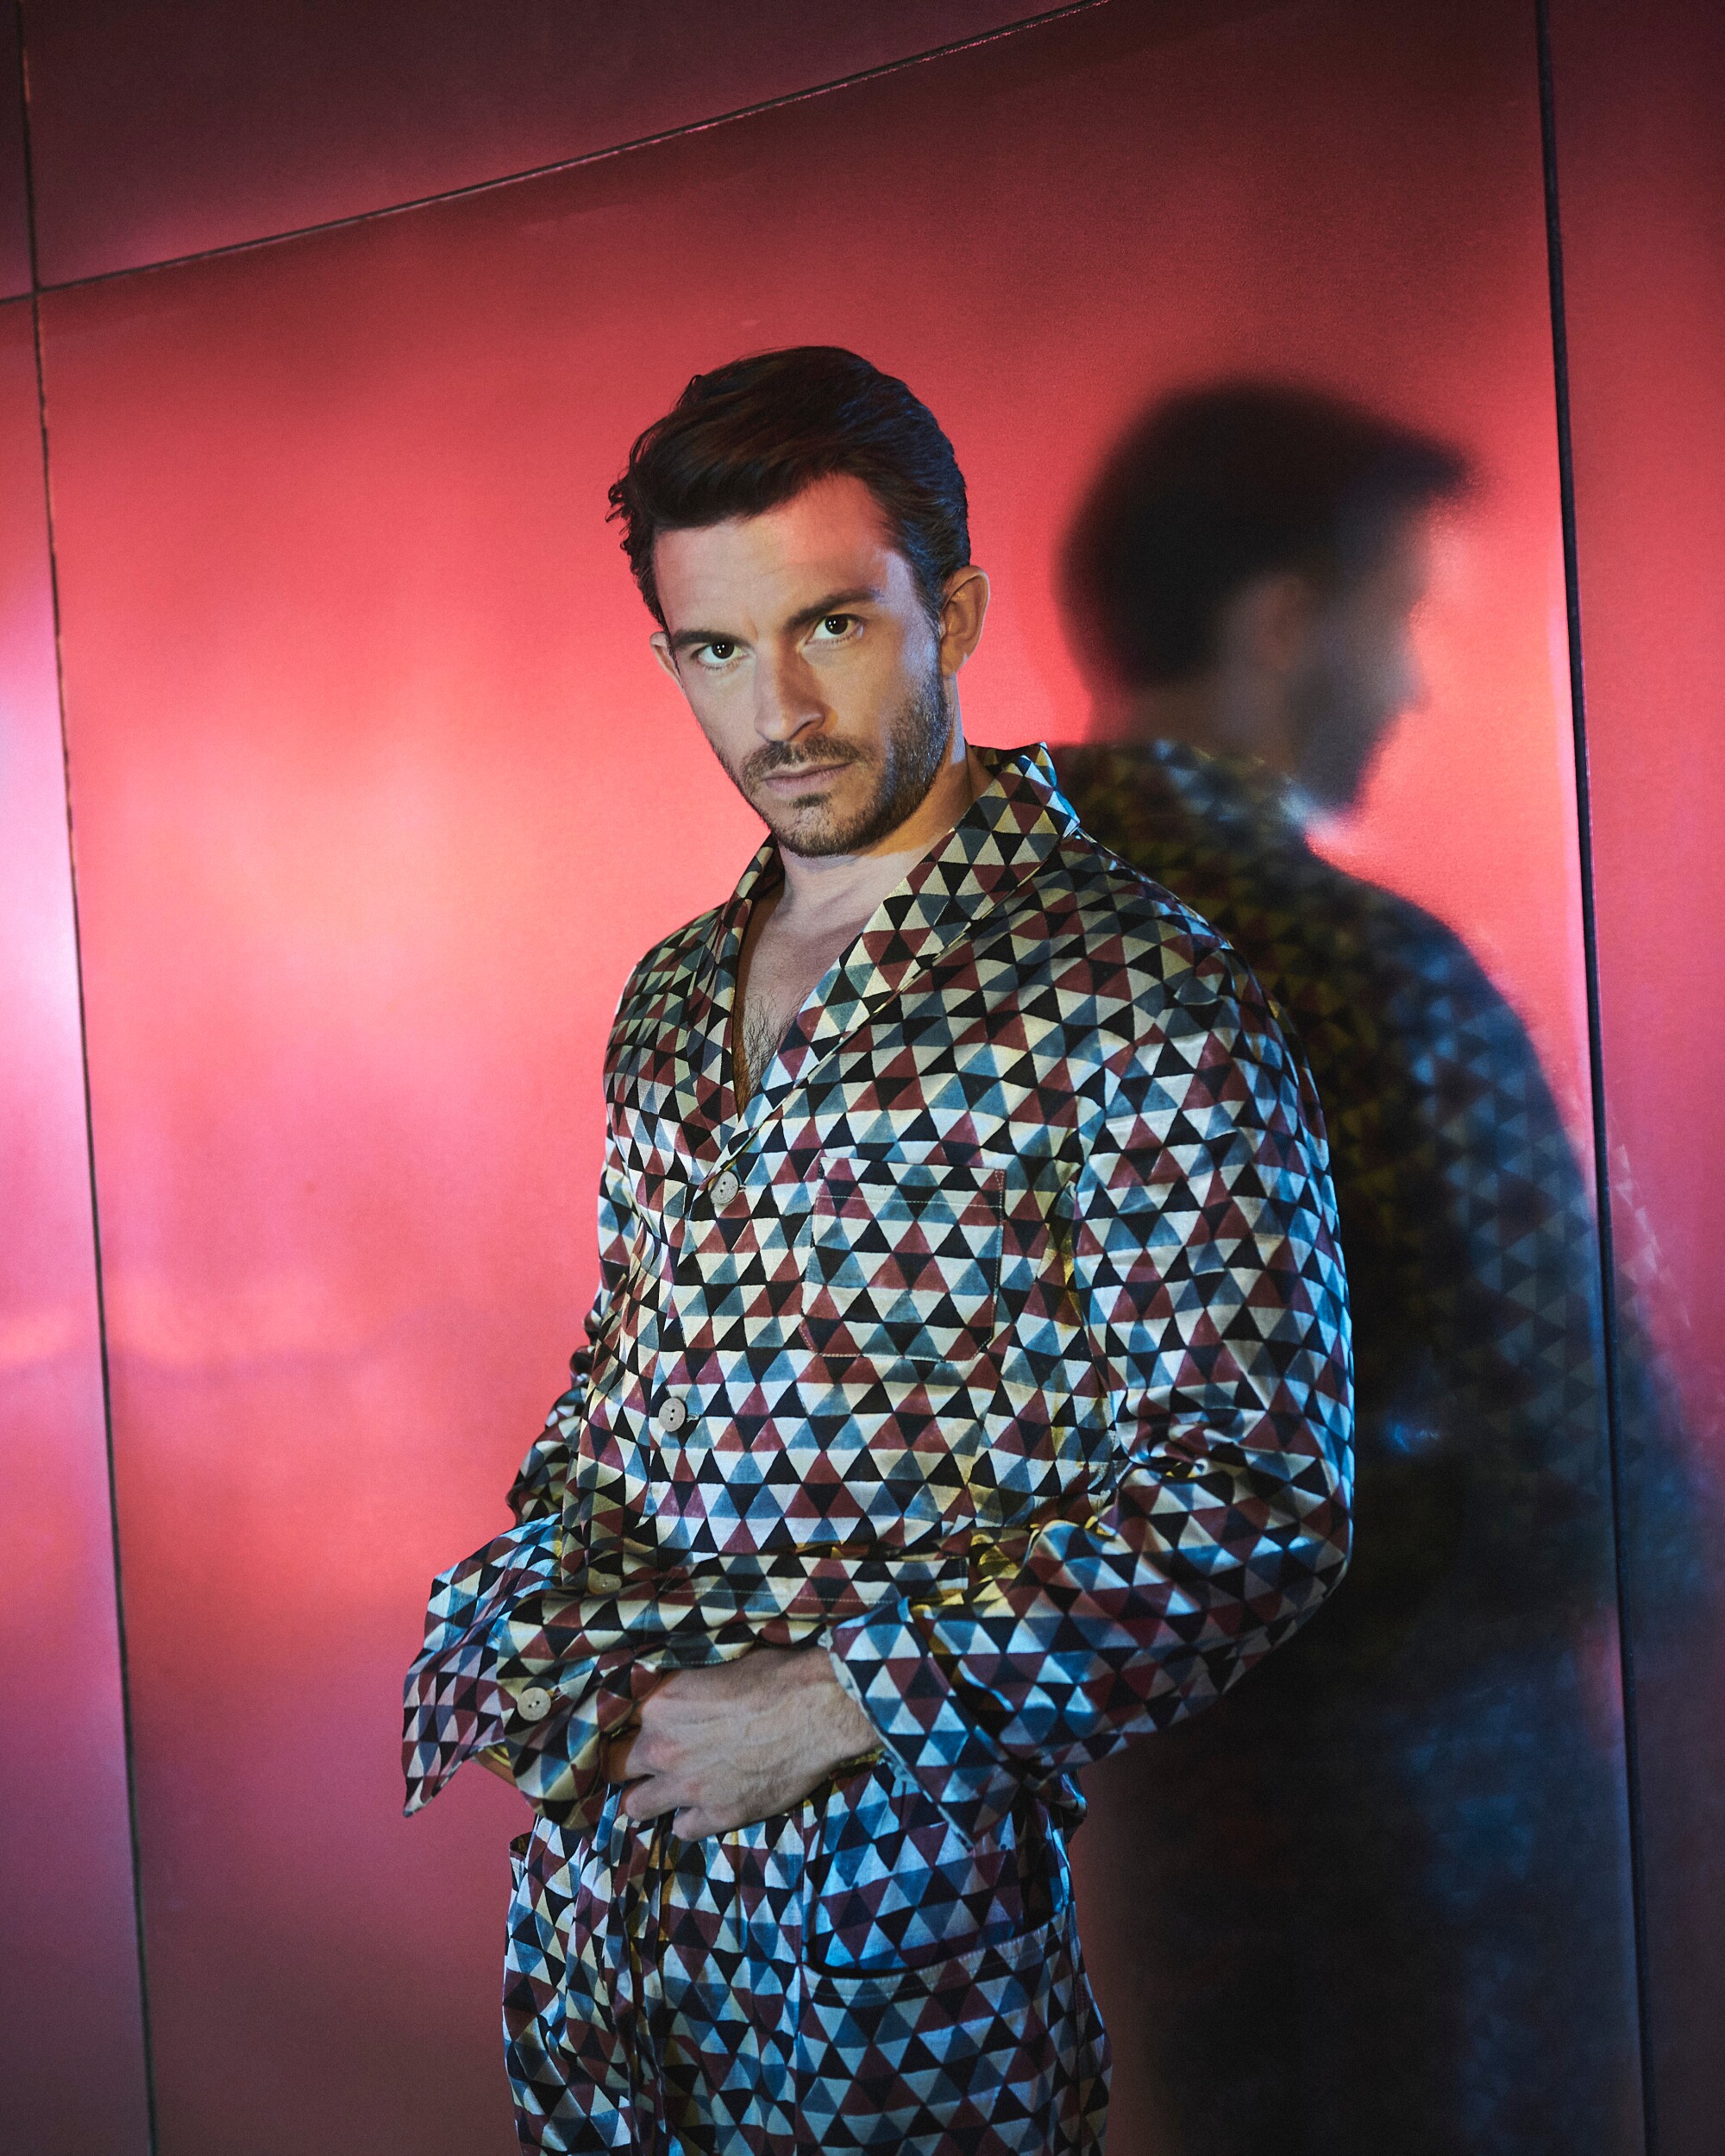 A man in patterned silk clothing leans up against a red, reflective wall.